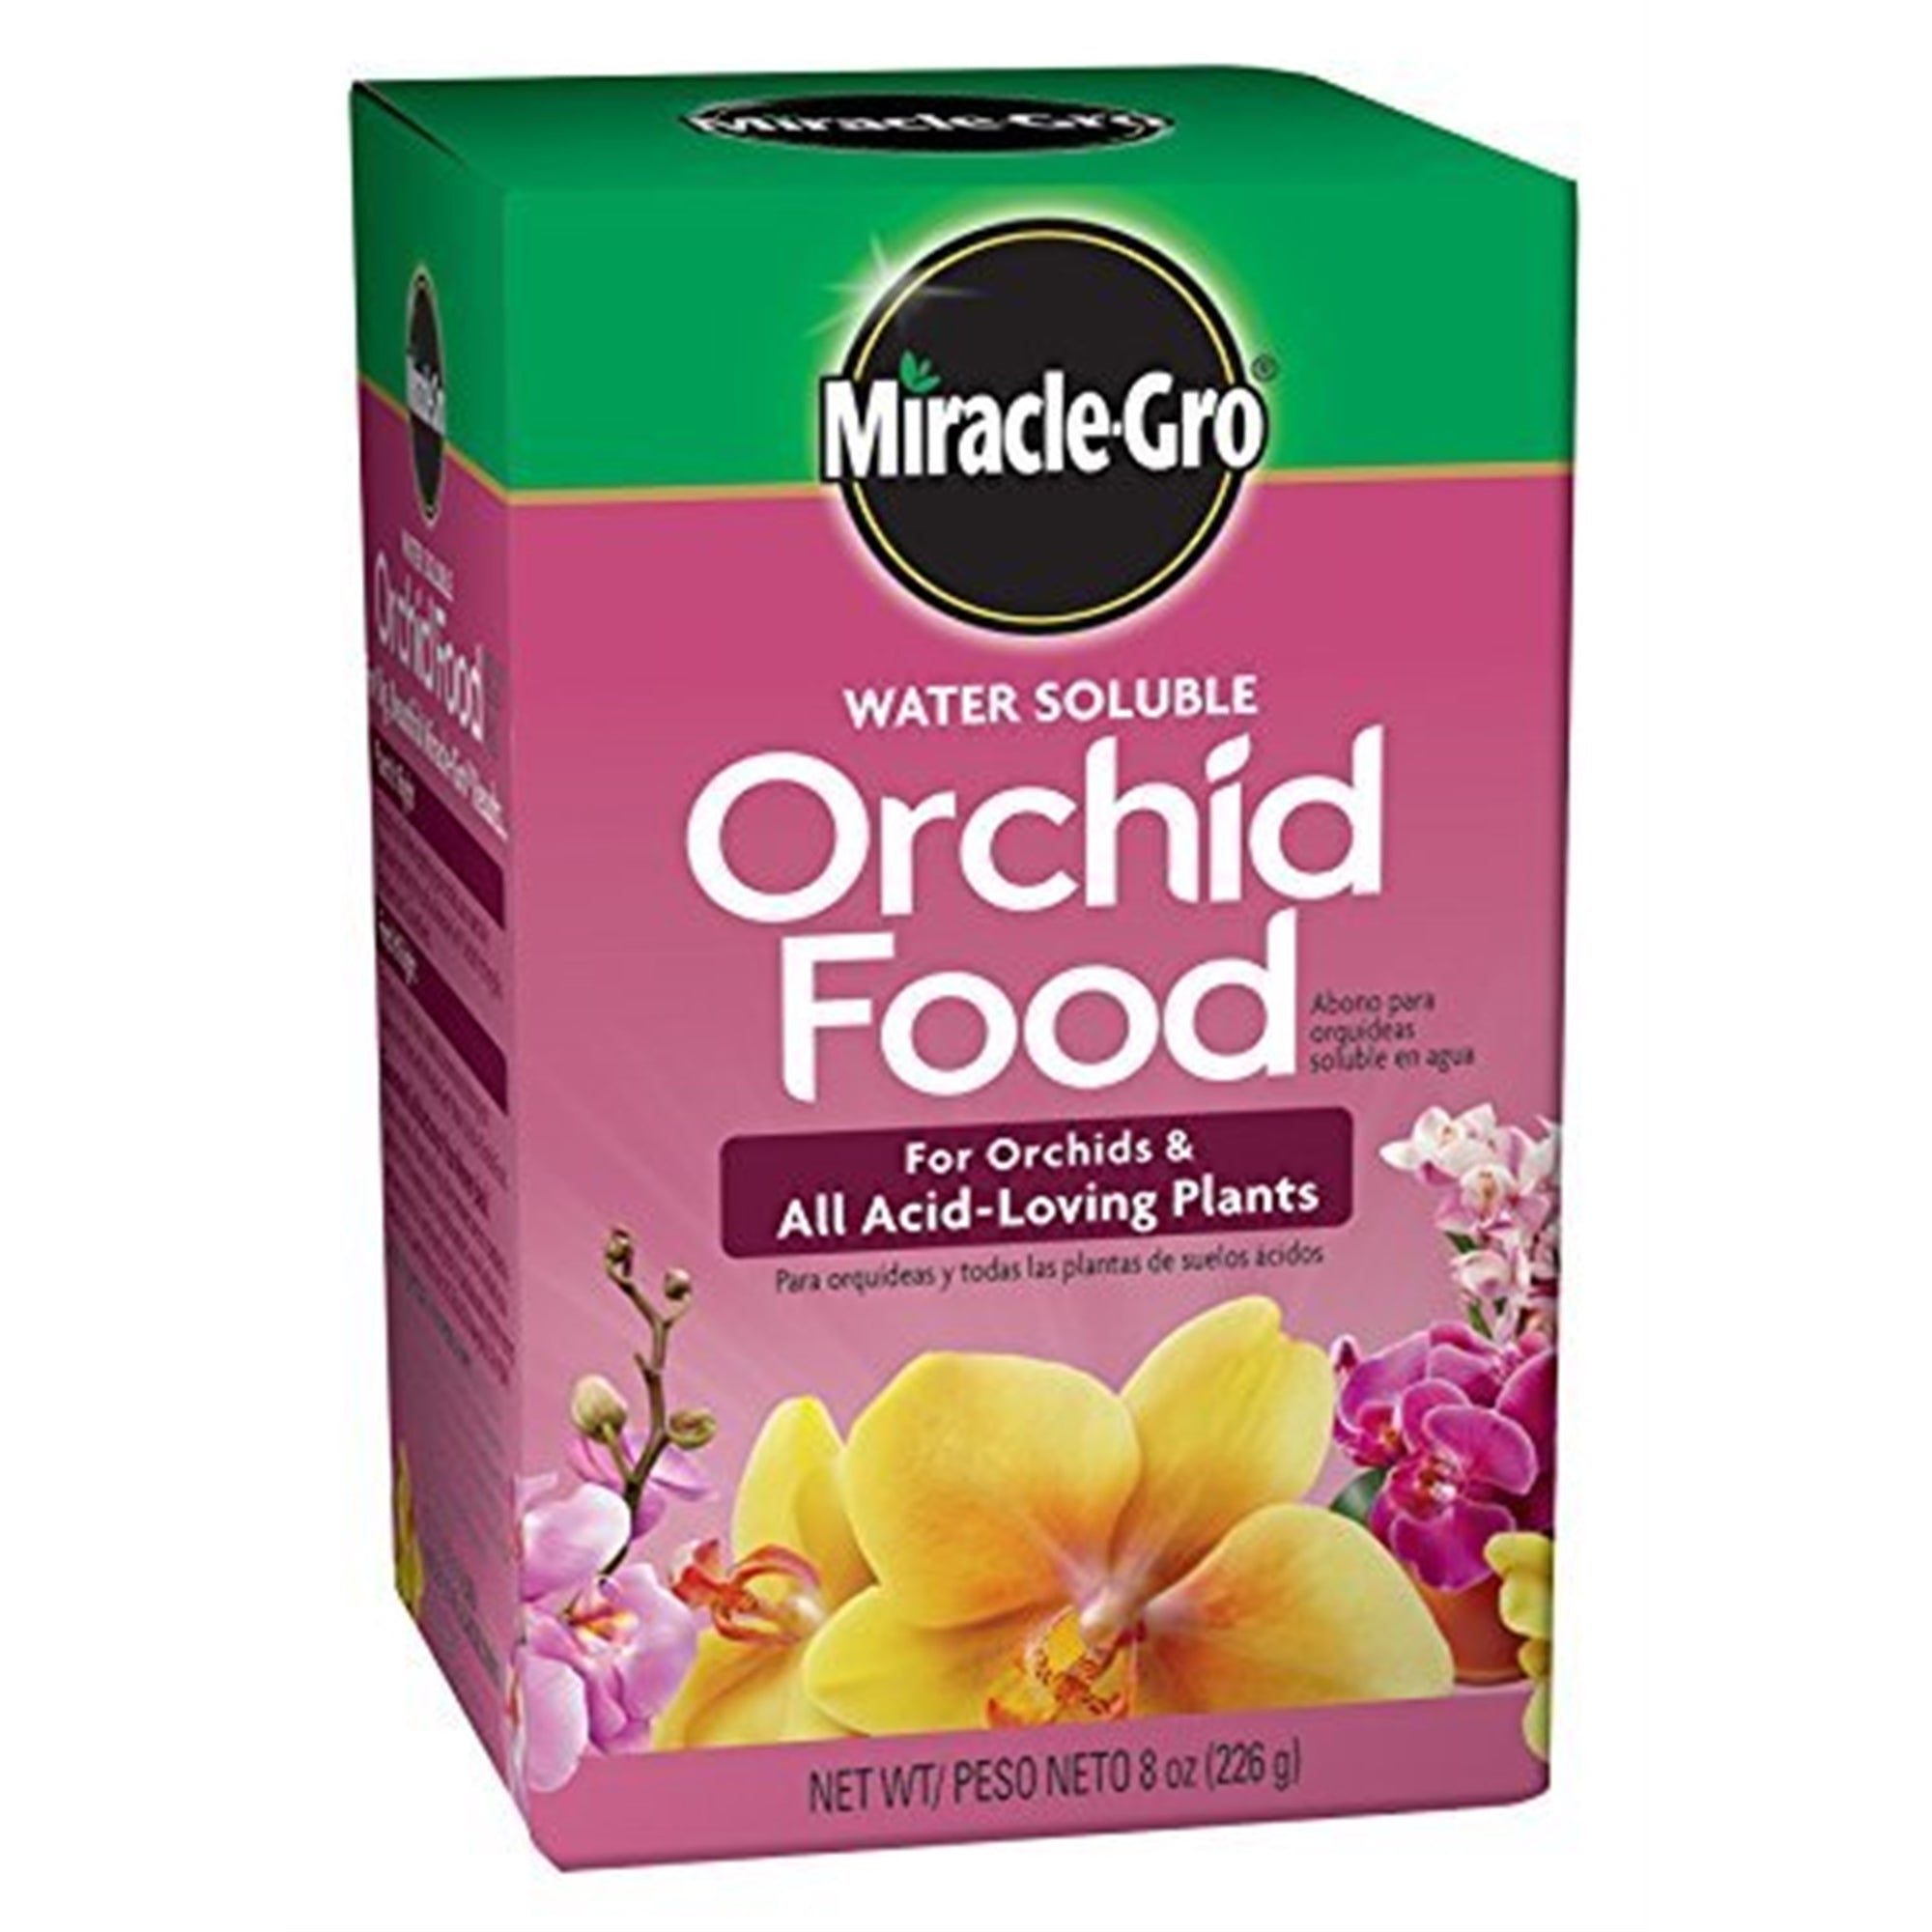 Miracle-Gro Orchid Food, 8 oz